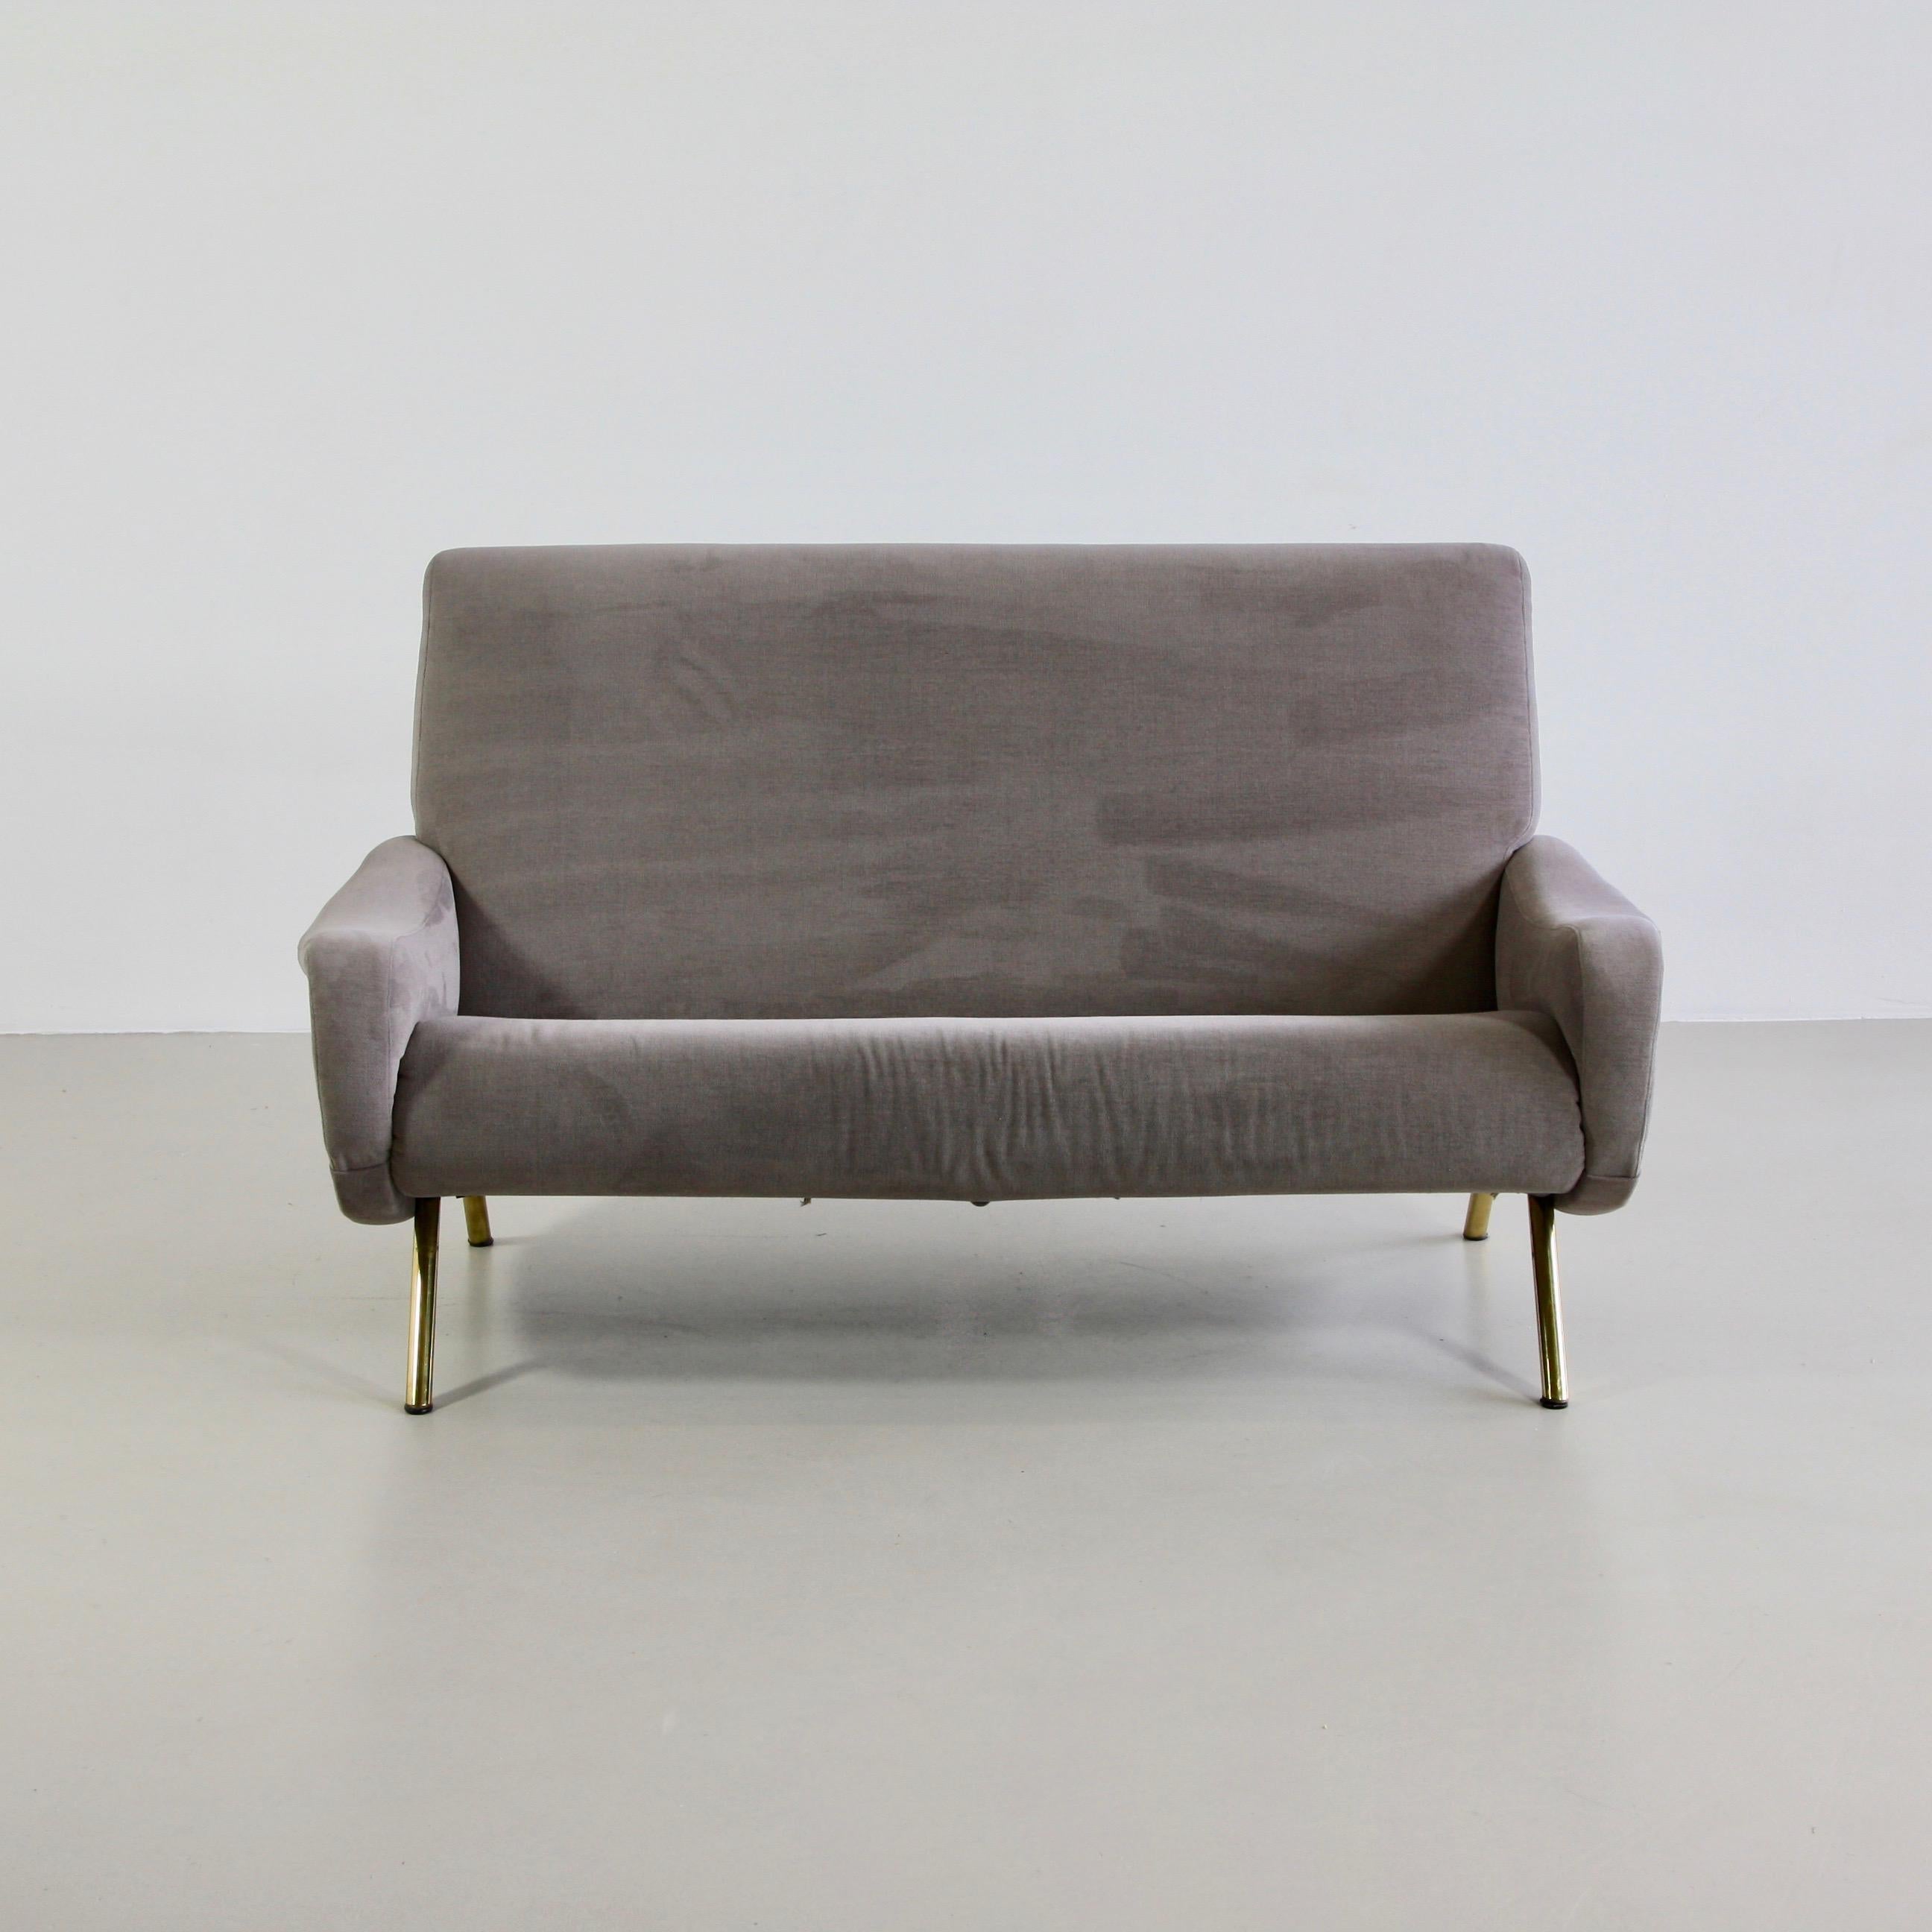 Two-seat sofa, designed by Marco Zanuso. Italy, Arflex 1951.

The lady two-seat sofa, metal frame with wooden construction. Recently upholstered in grey velvet material. Brass legs. Rare and comfortable!

Reference for the chair: Reference: